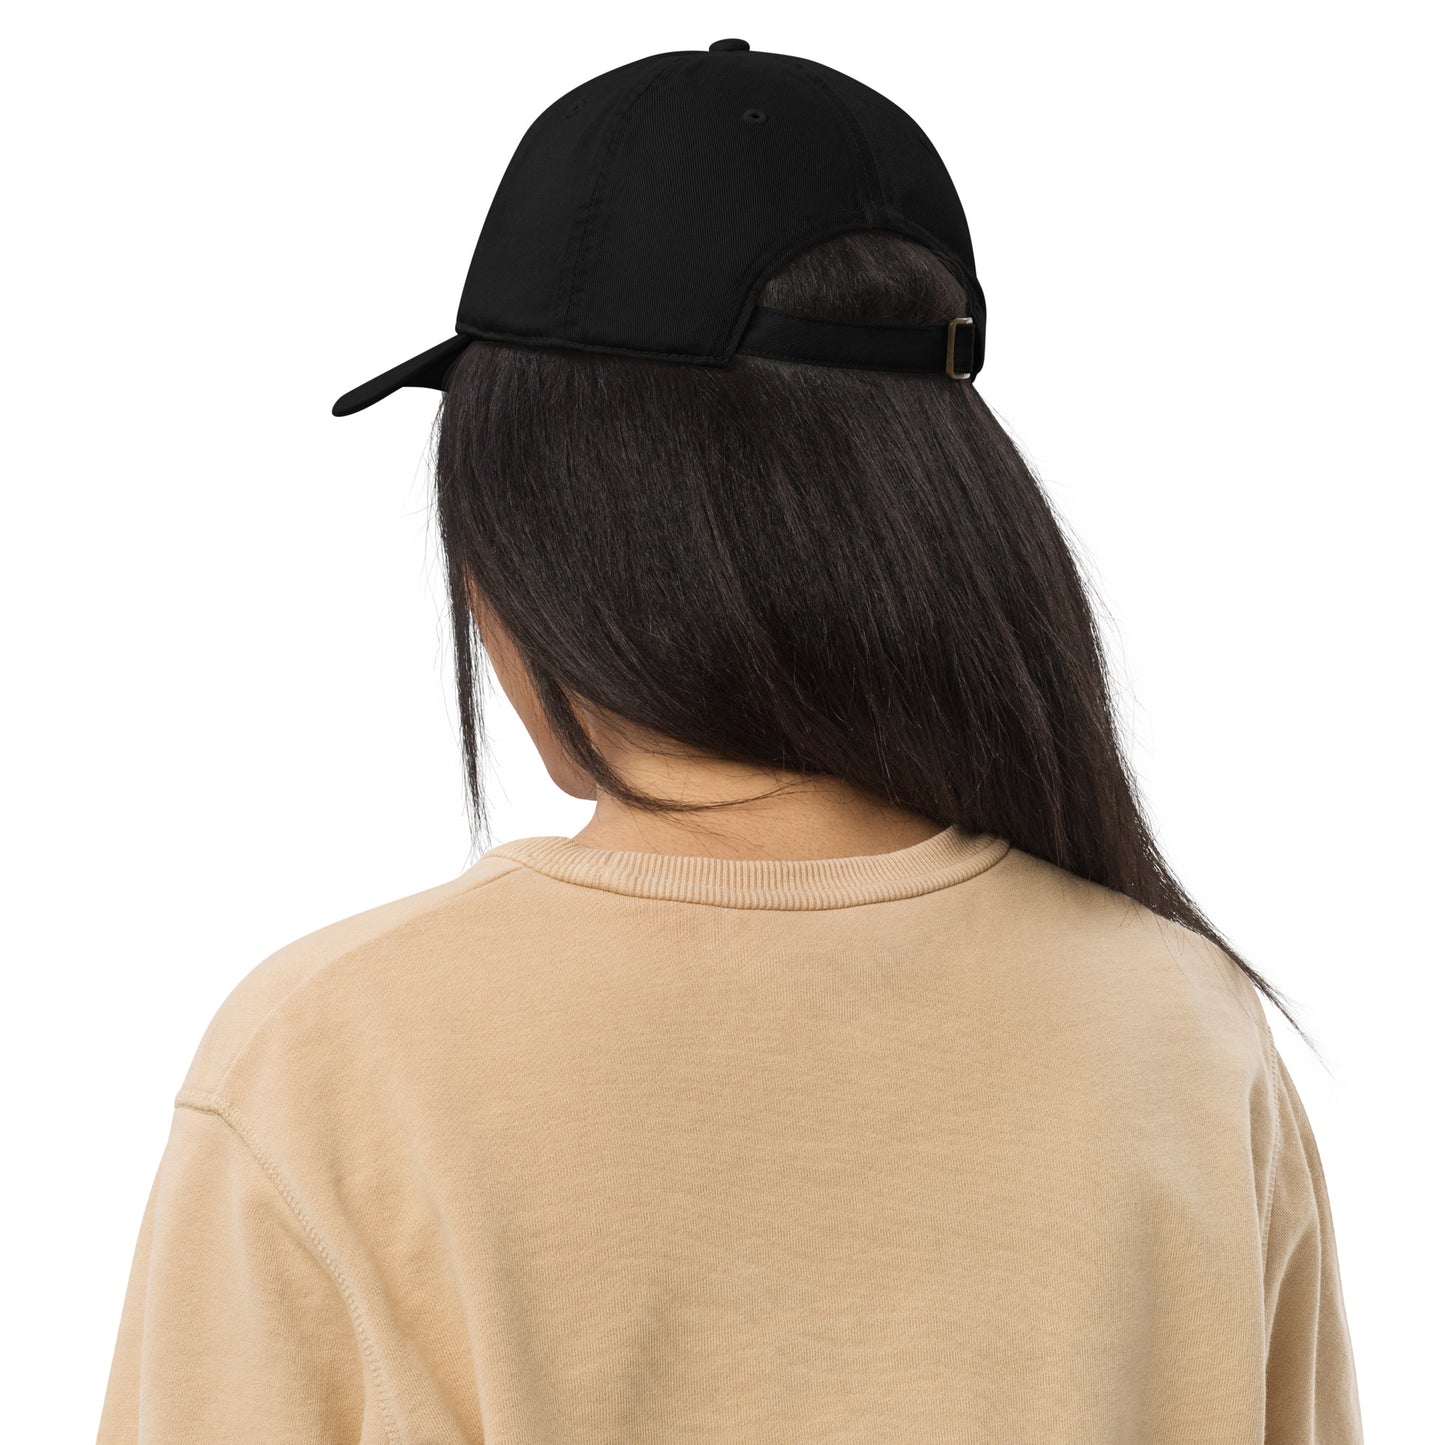 Organic dad hat - Embroidered Black Clover